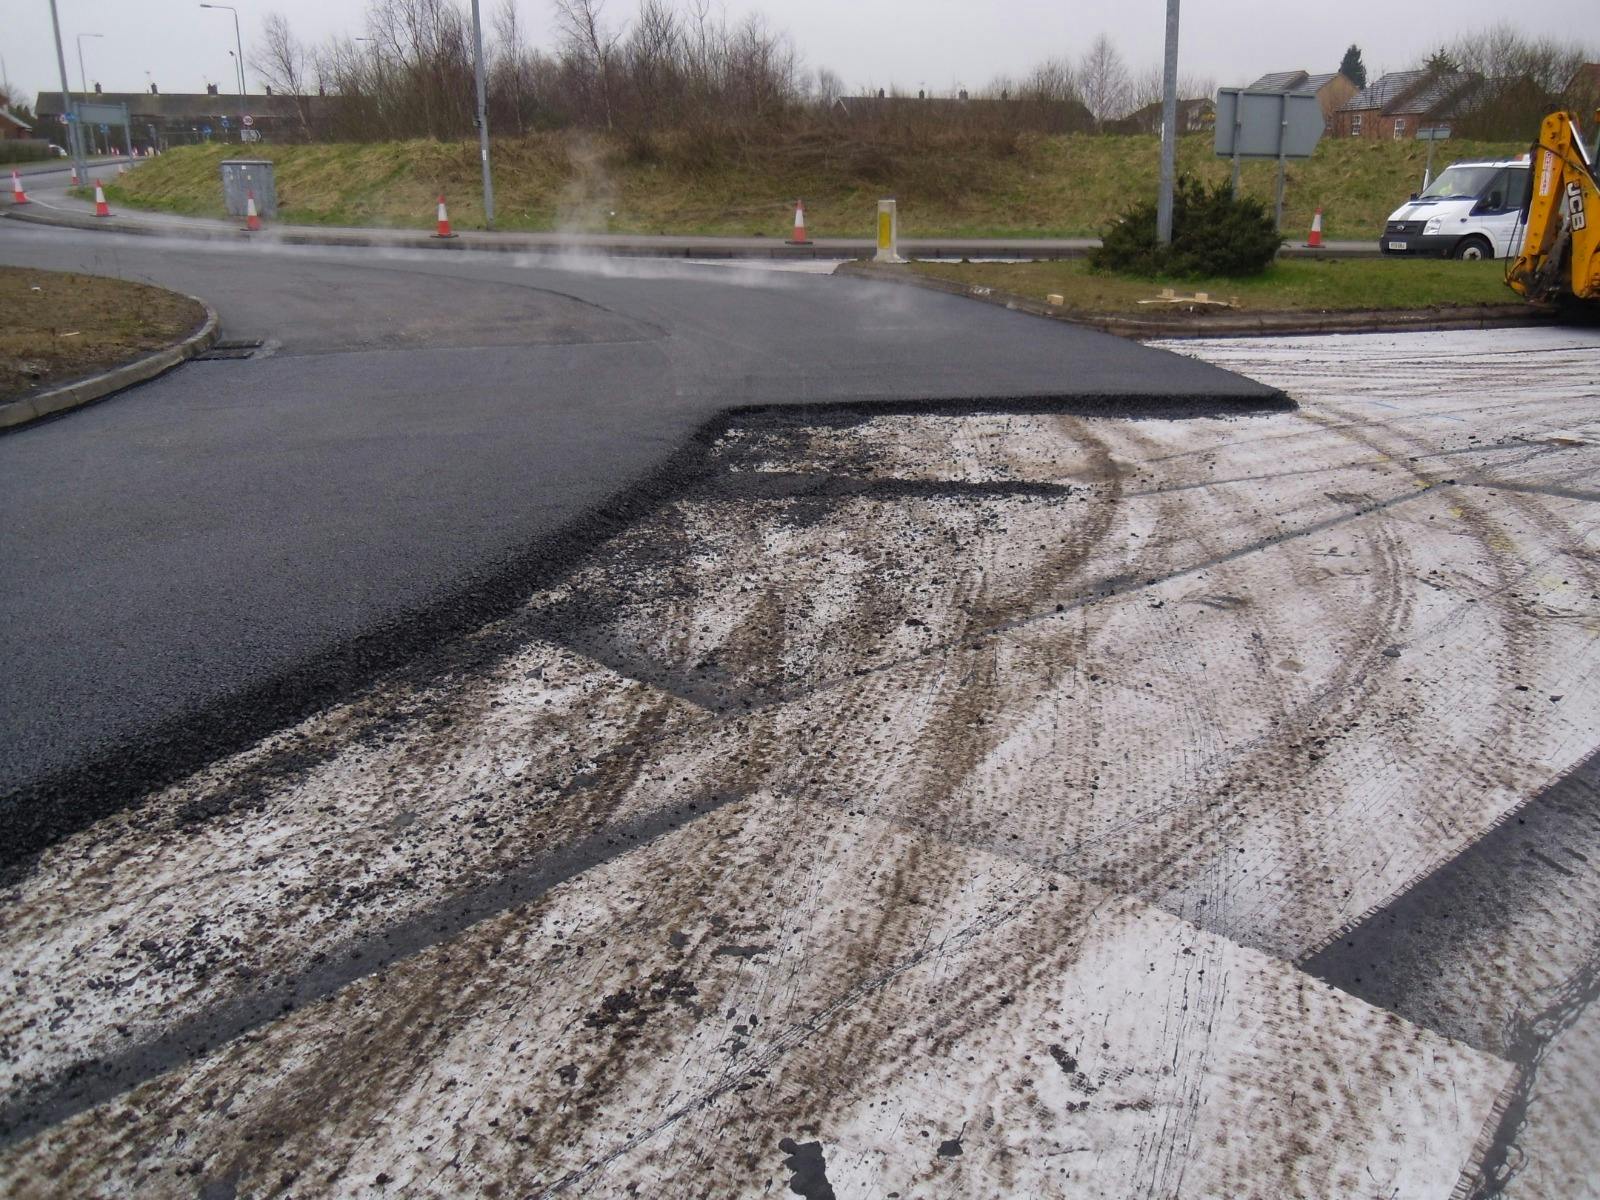 The A617 is a primary A-road in Derbyshire and Nottinghamshire (East Midlands) in England. Over time, cracks appeared on the road, and rehabilitation was needed.